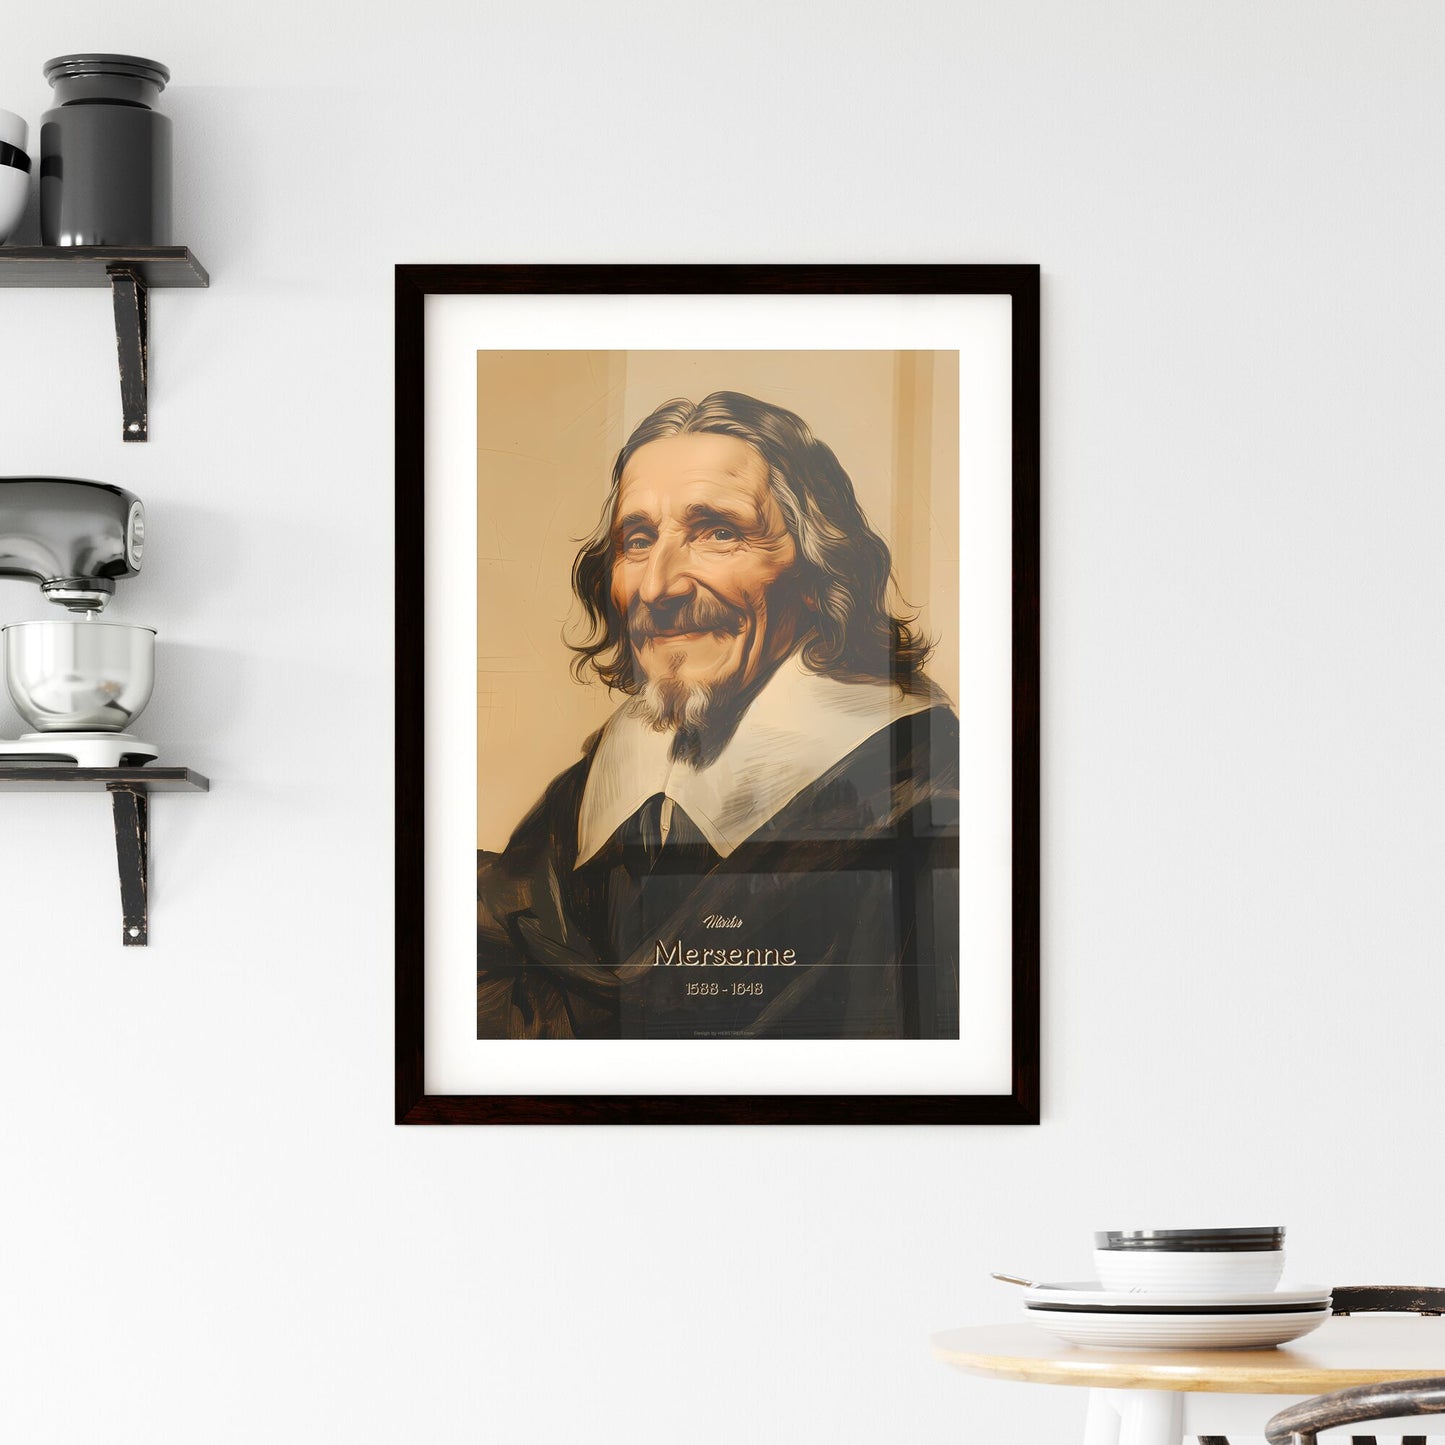 Marin, Mersenne, 1588 - 1648, A Poster of a man with long hair and a beard Default Title